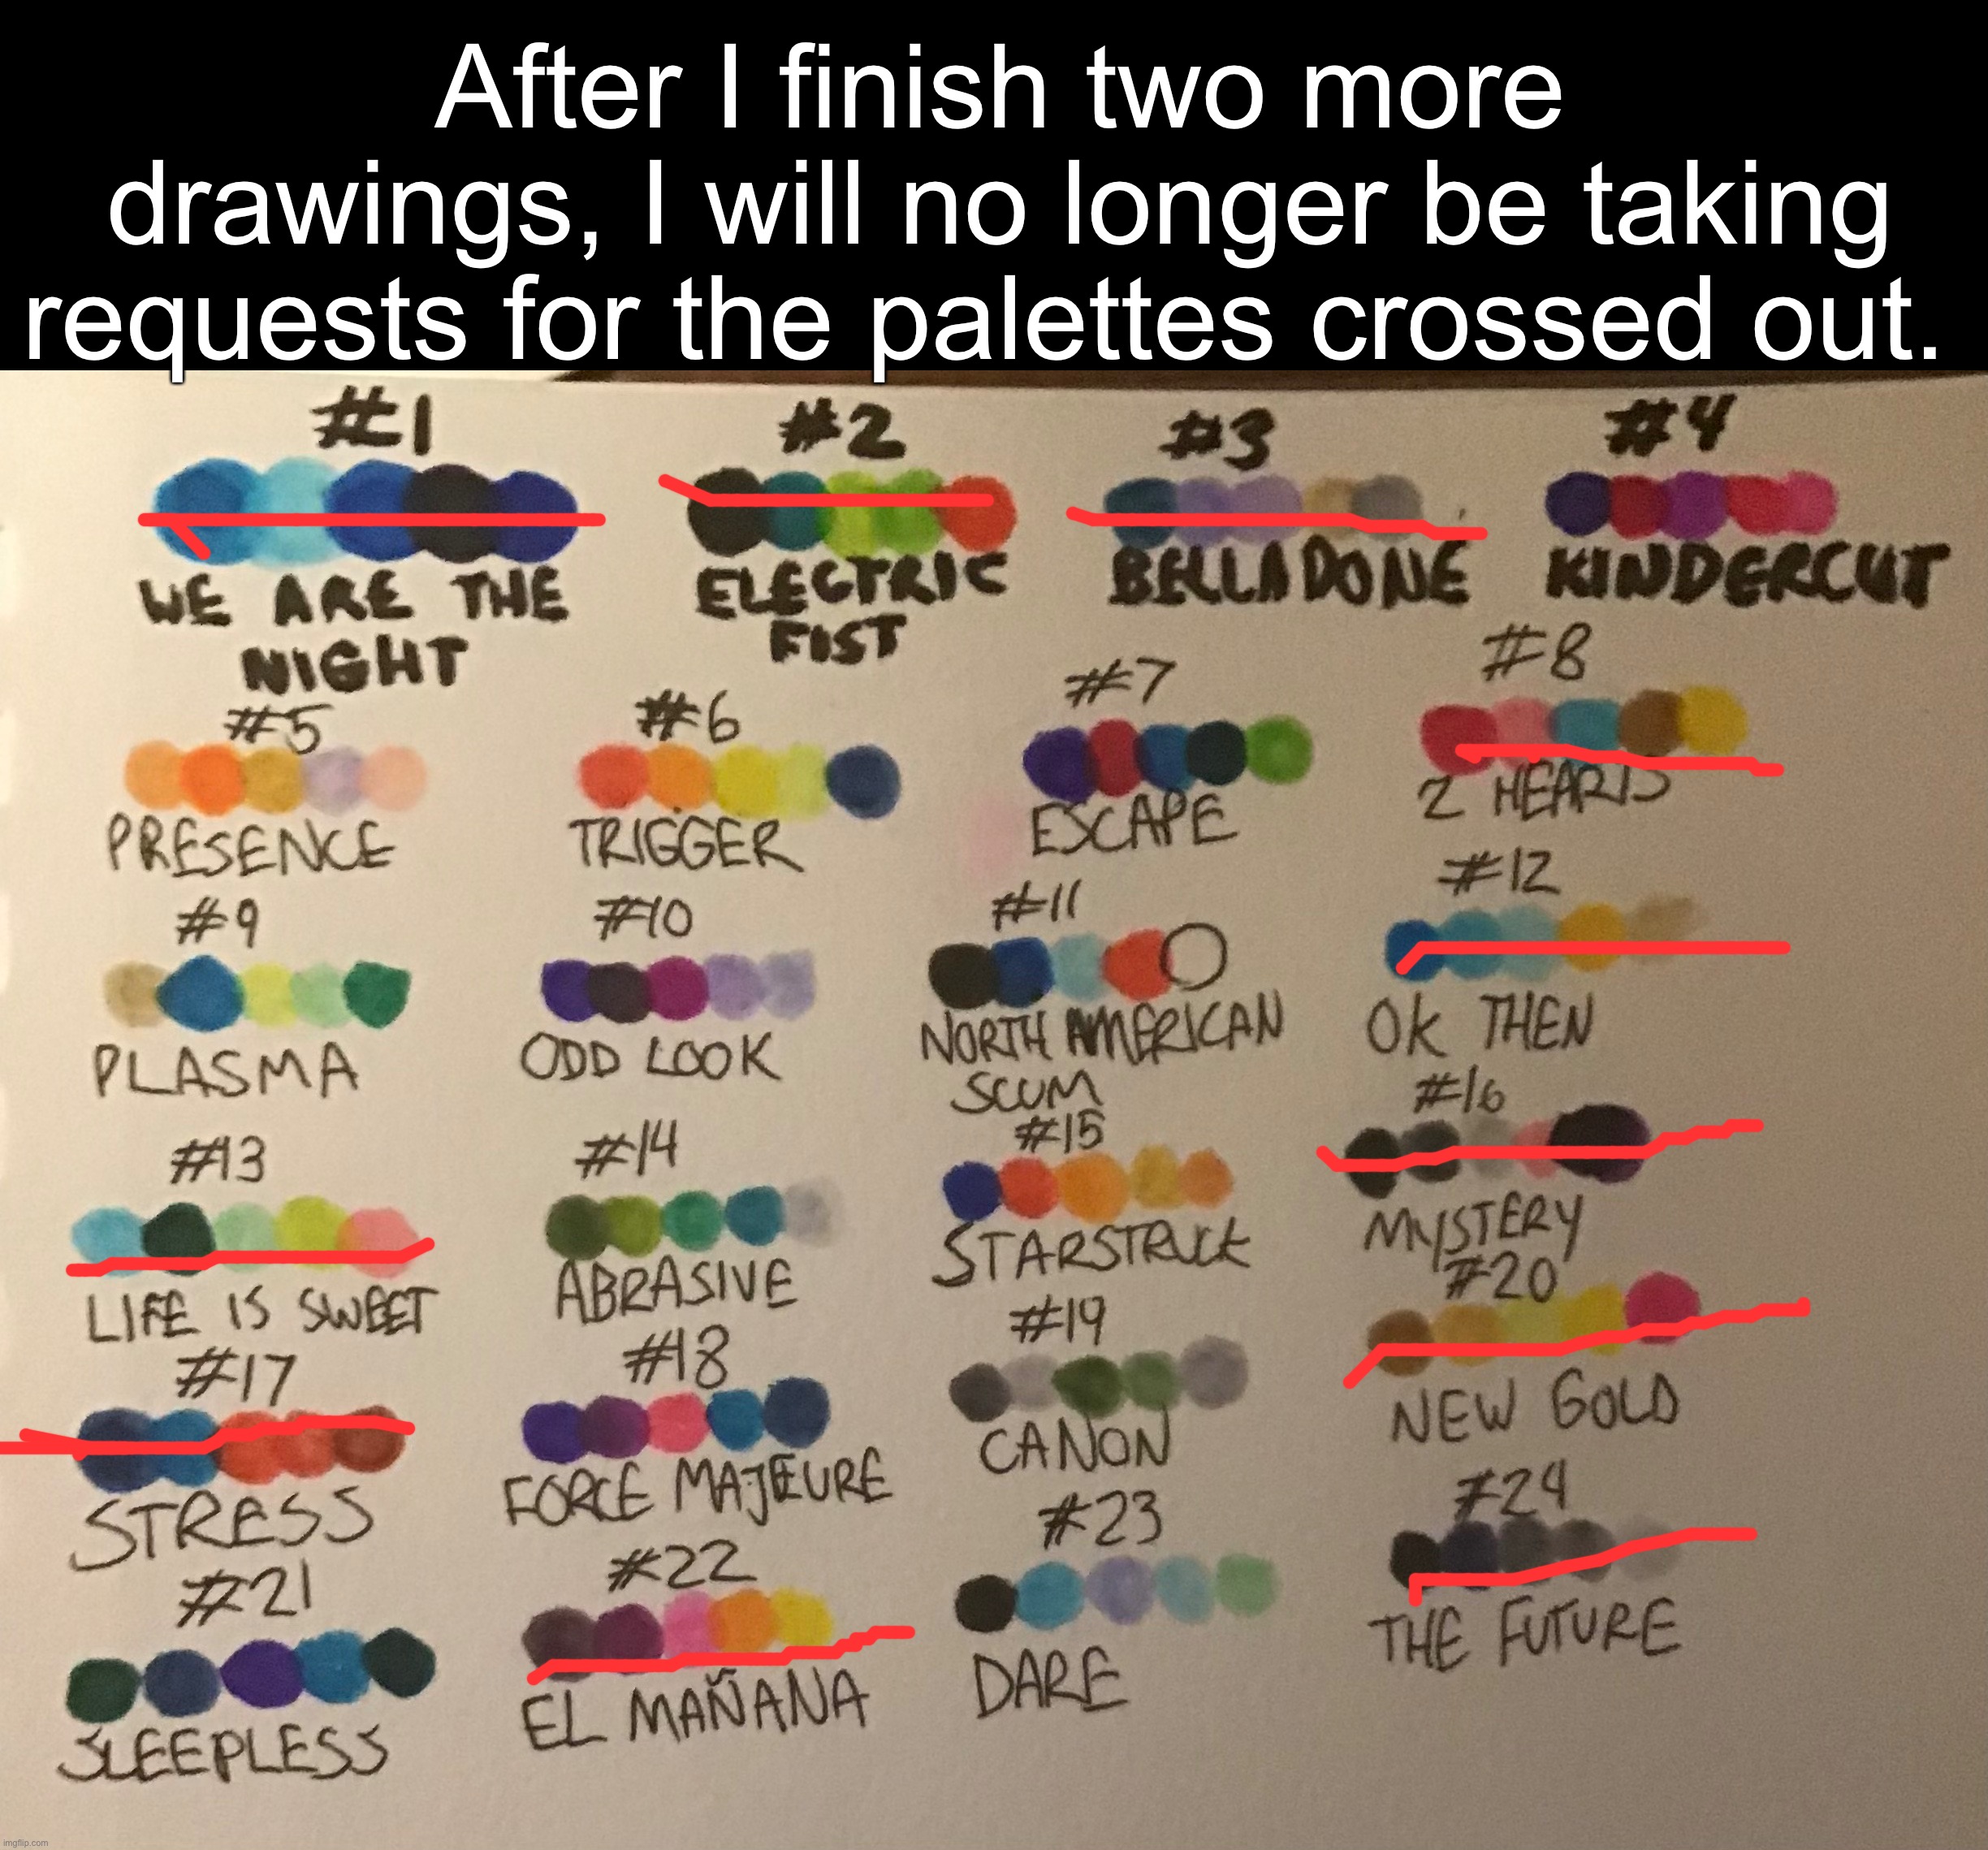 The rest are still open, though! | After I finish two more drawings, I will no longer be taking requests for the palettes crossed out. | made w/ Imgflip meme maker